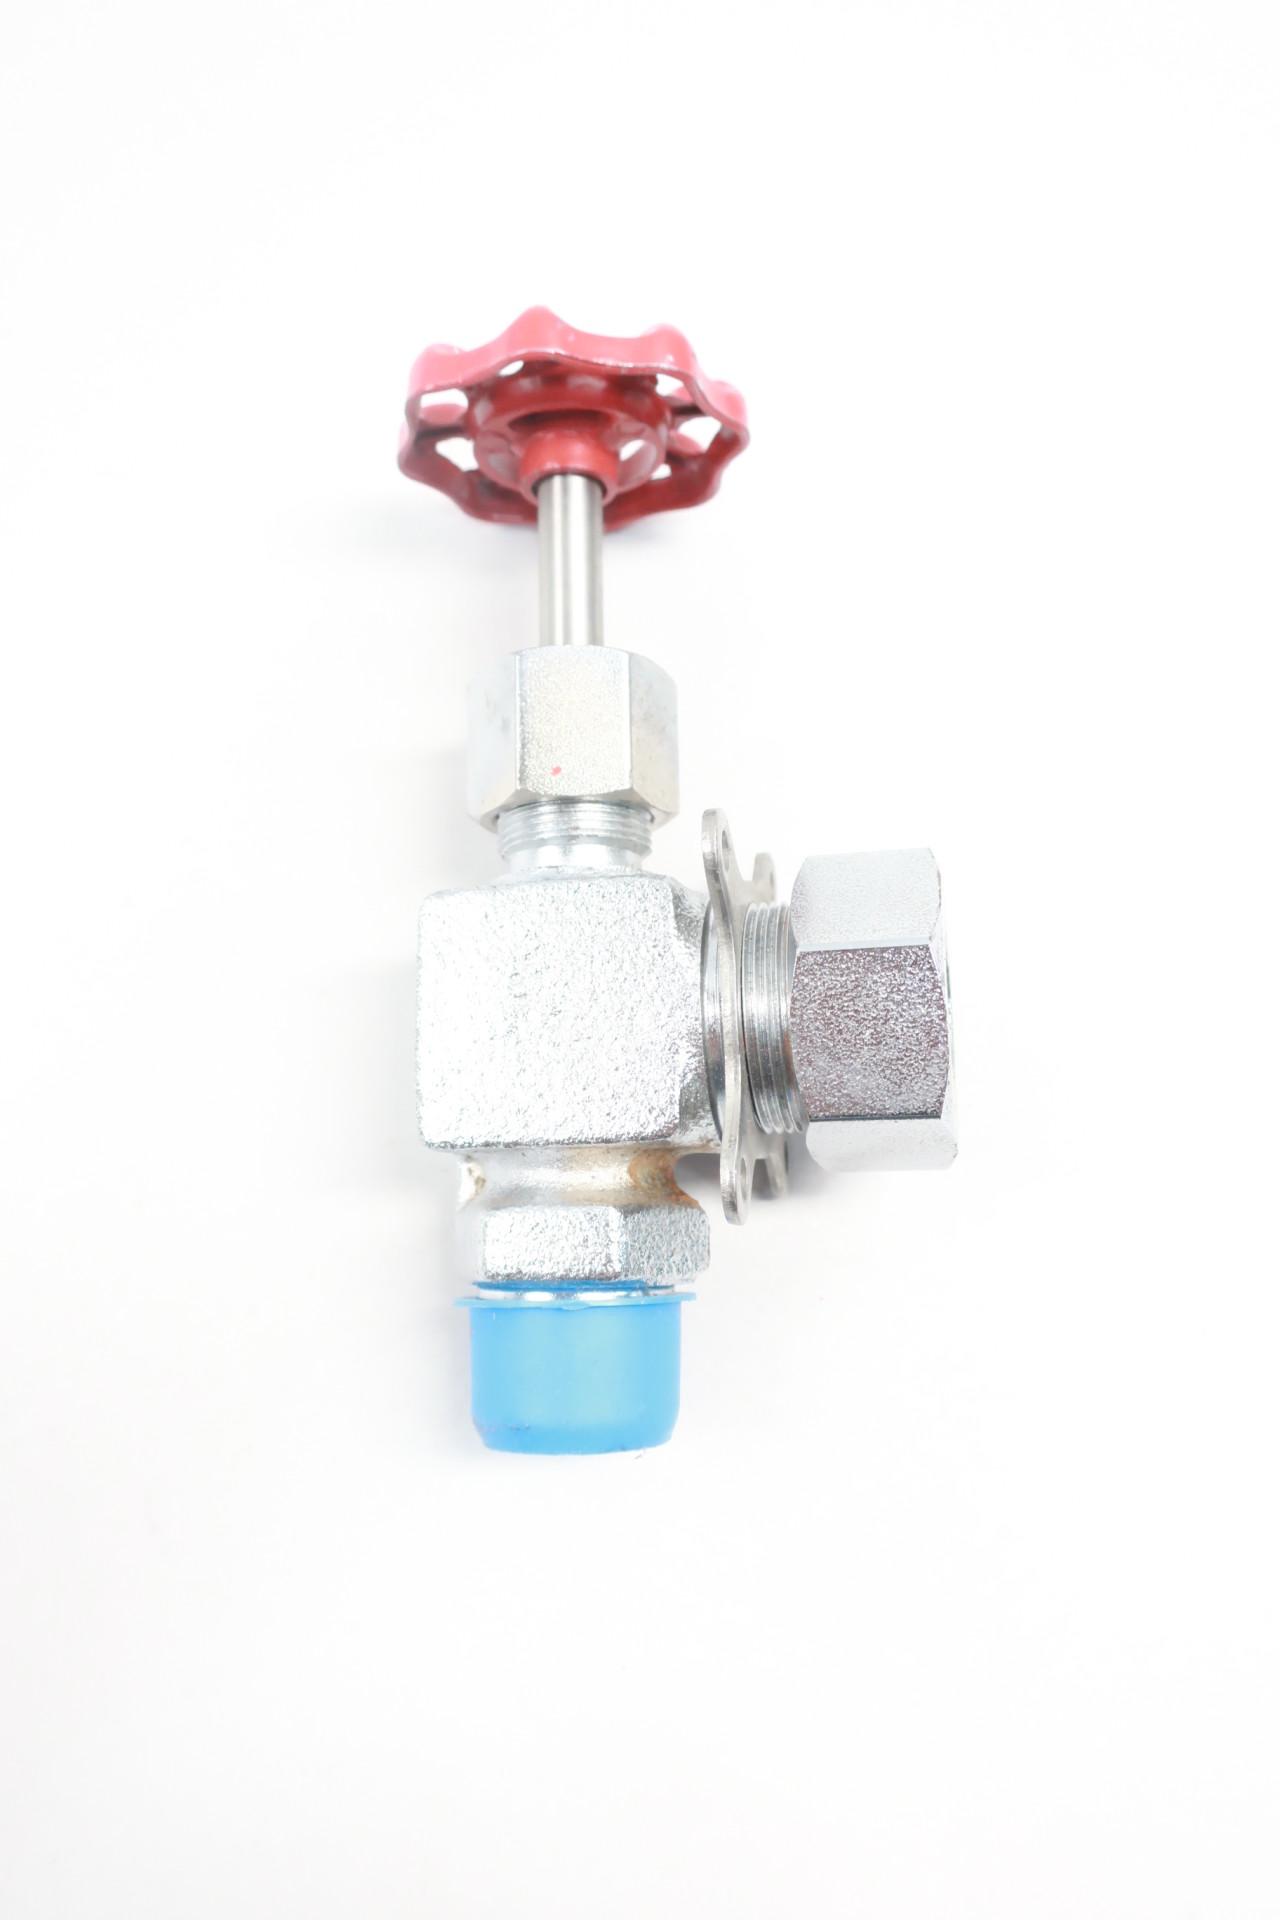 Details about   Ernst Manual Gage Water Valve 3/4in Npt 